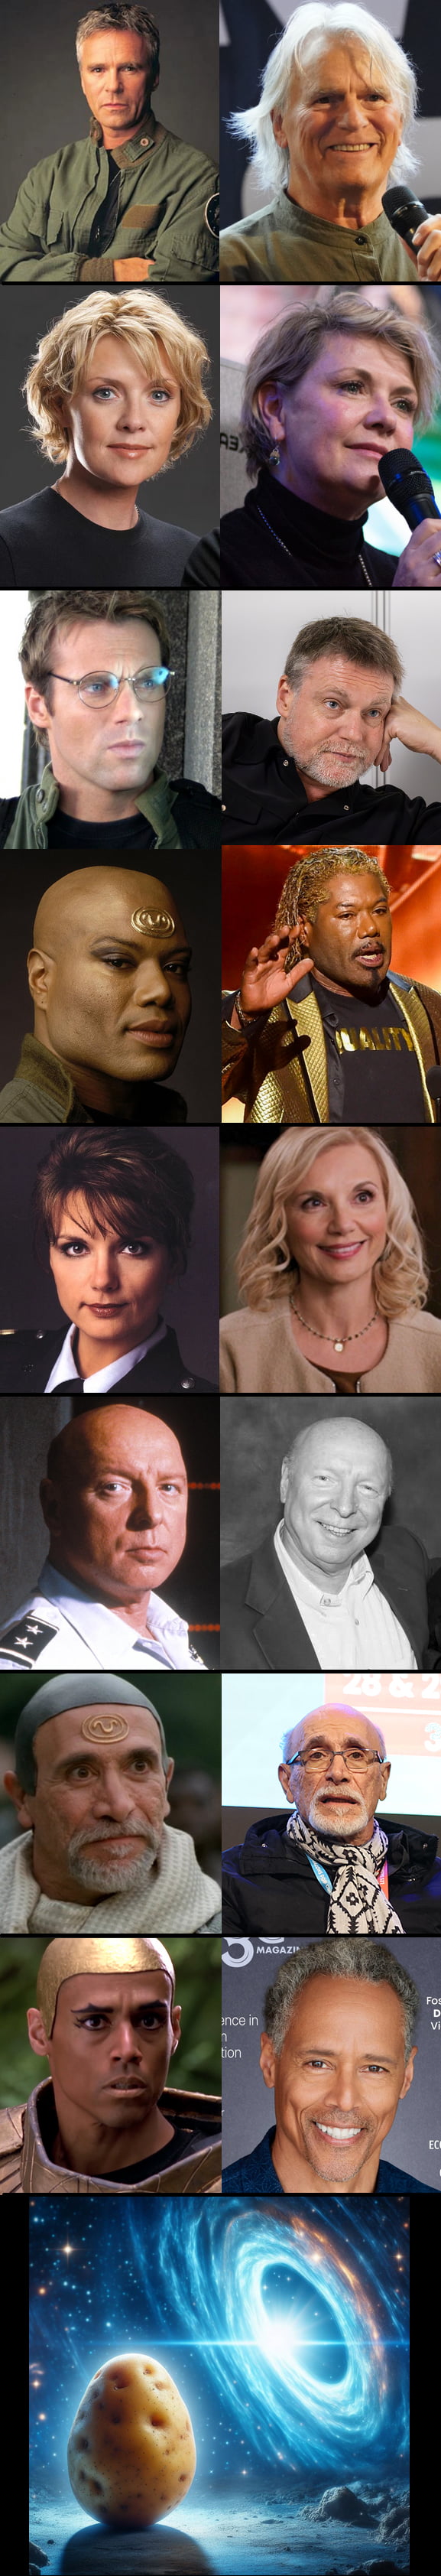 Stargate cast then and now 2023